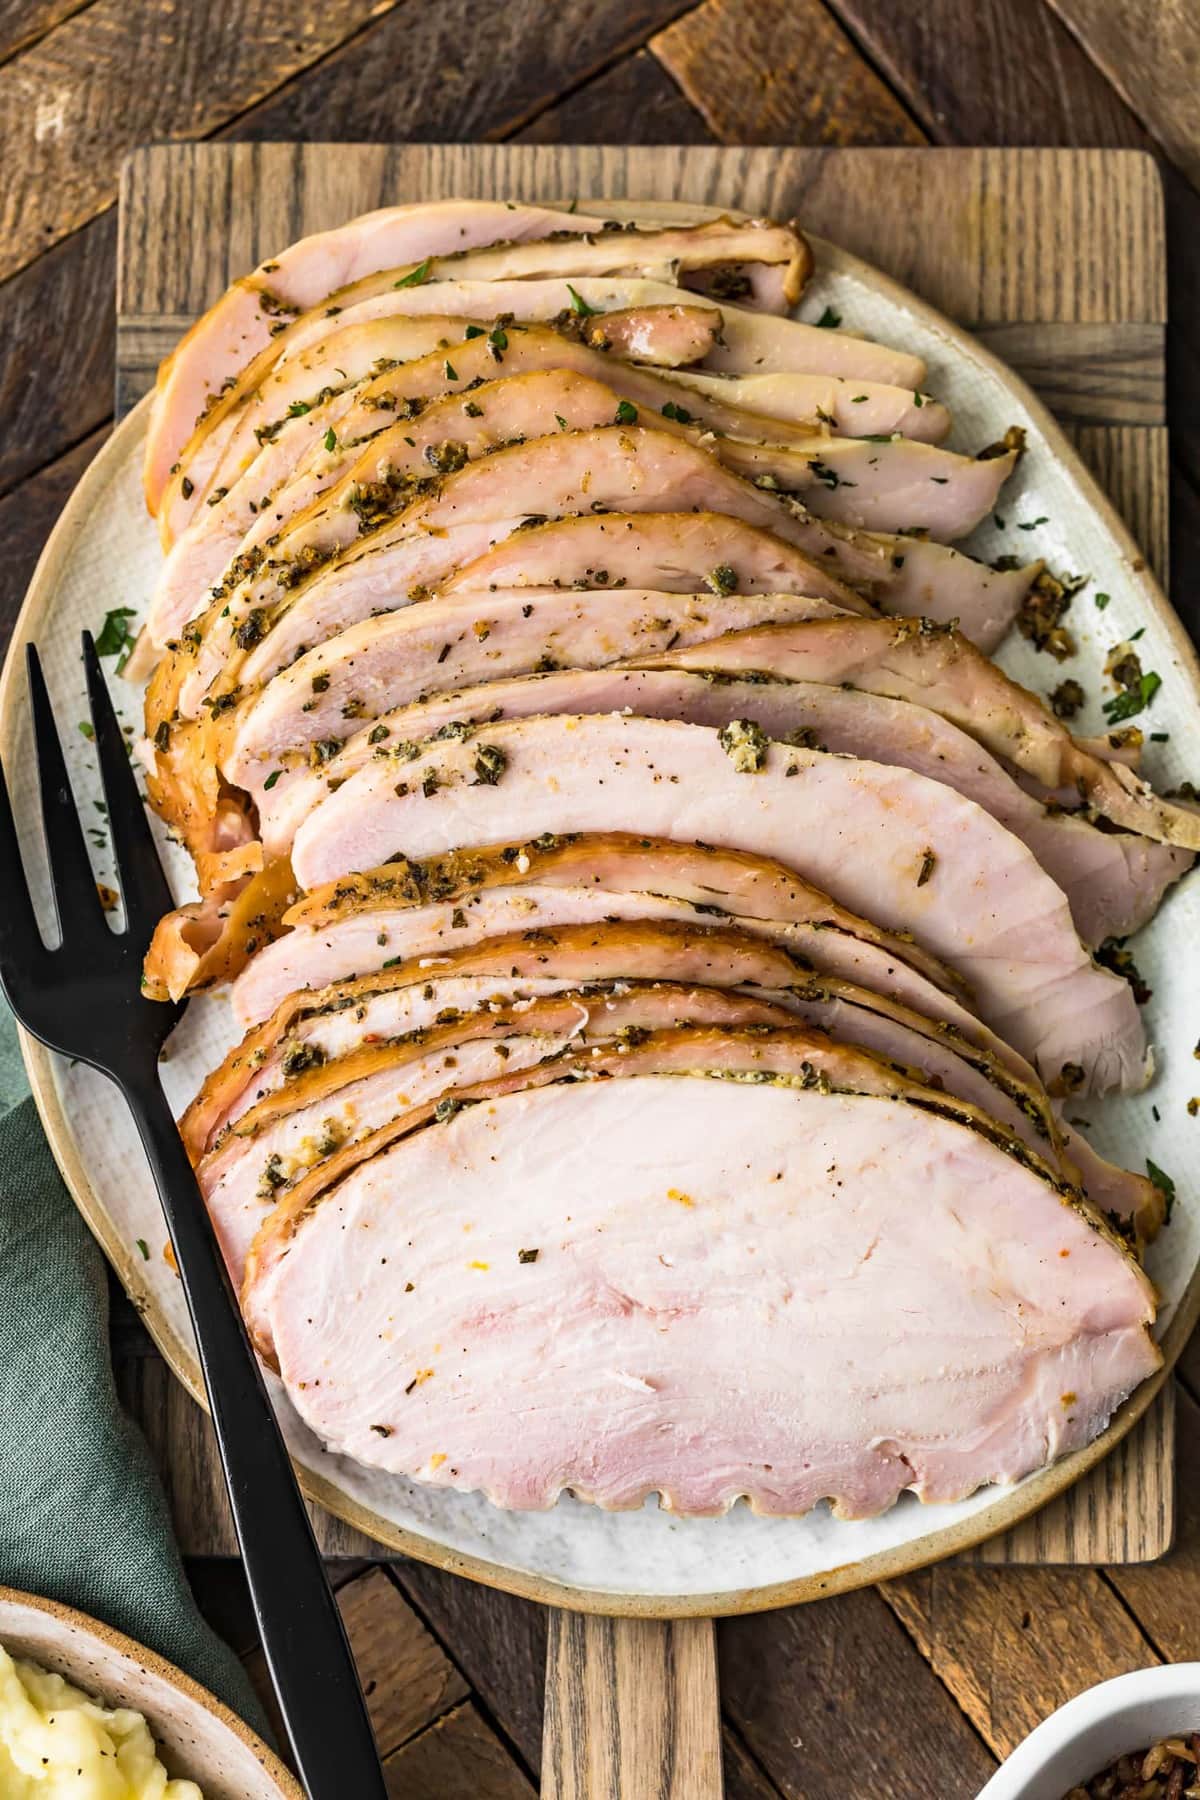 Slices of smoked turkey breast on a serving plate